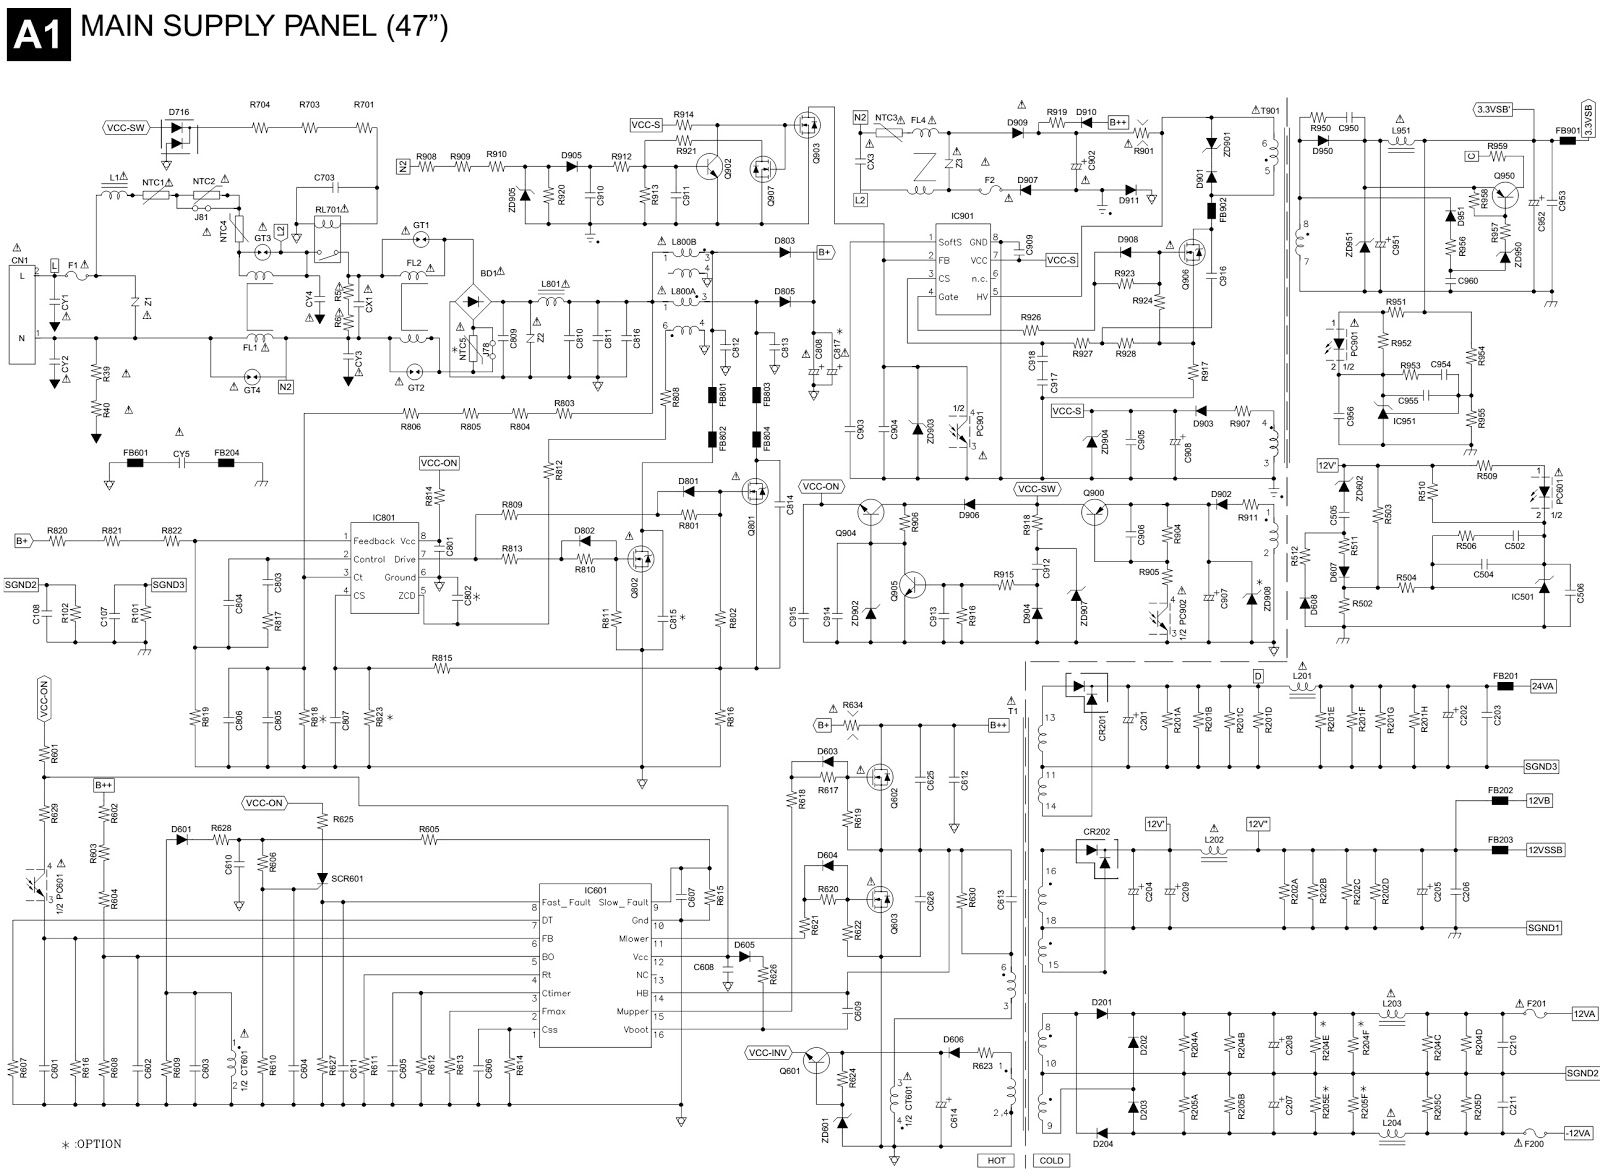 Electro help: PHILIPS 47 inch LCD TV POWER SUPPLY SCHEMATIC